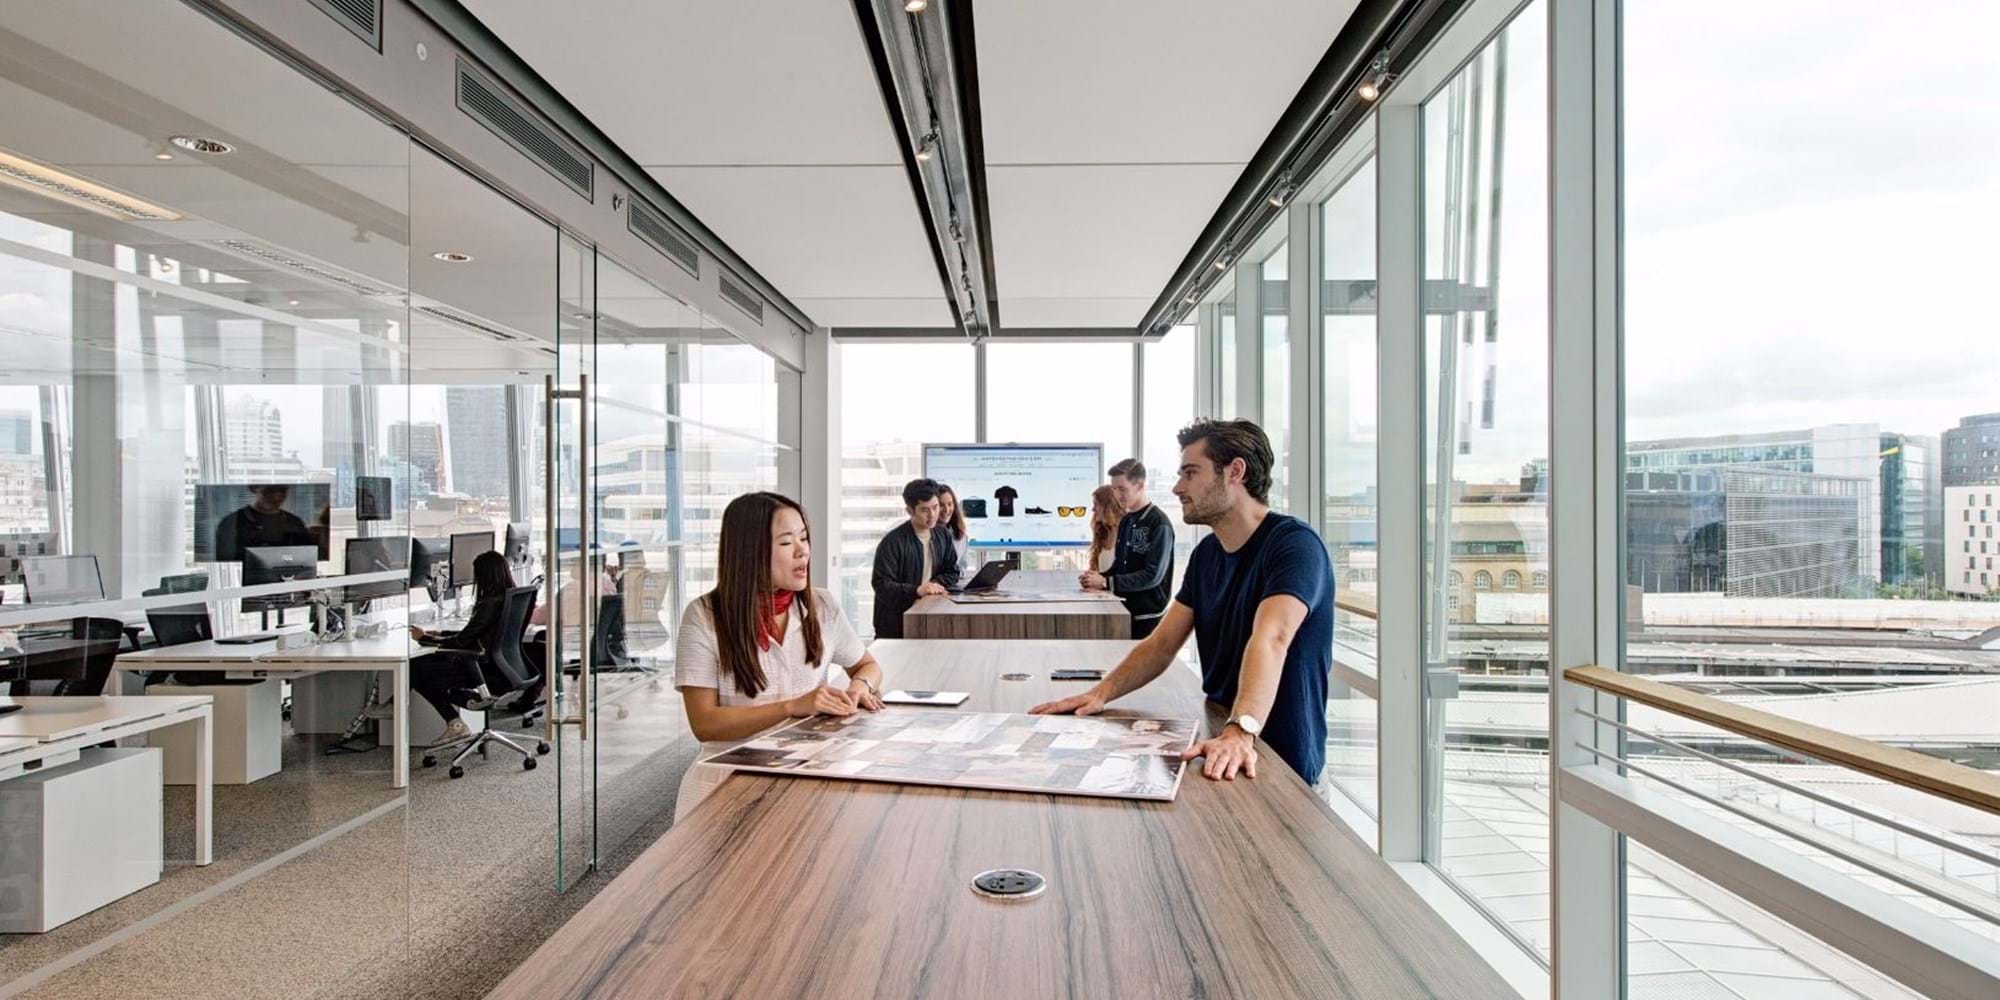 Modus Workspace office design, fit out and refurbishment - Matches Fashion - The Shard, London - Matches Fashion 03 highres sRGB.jpg